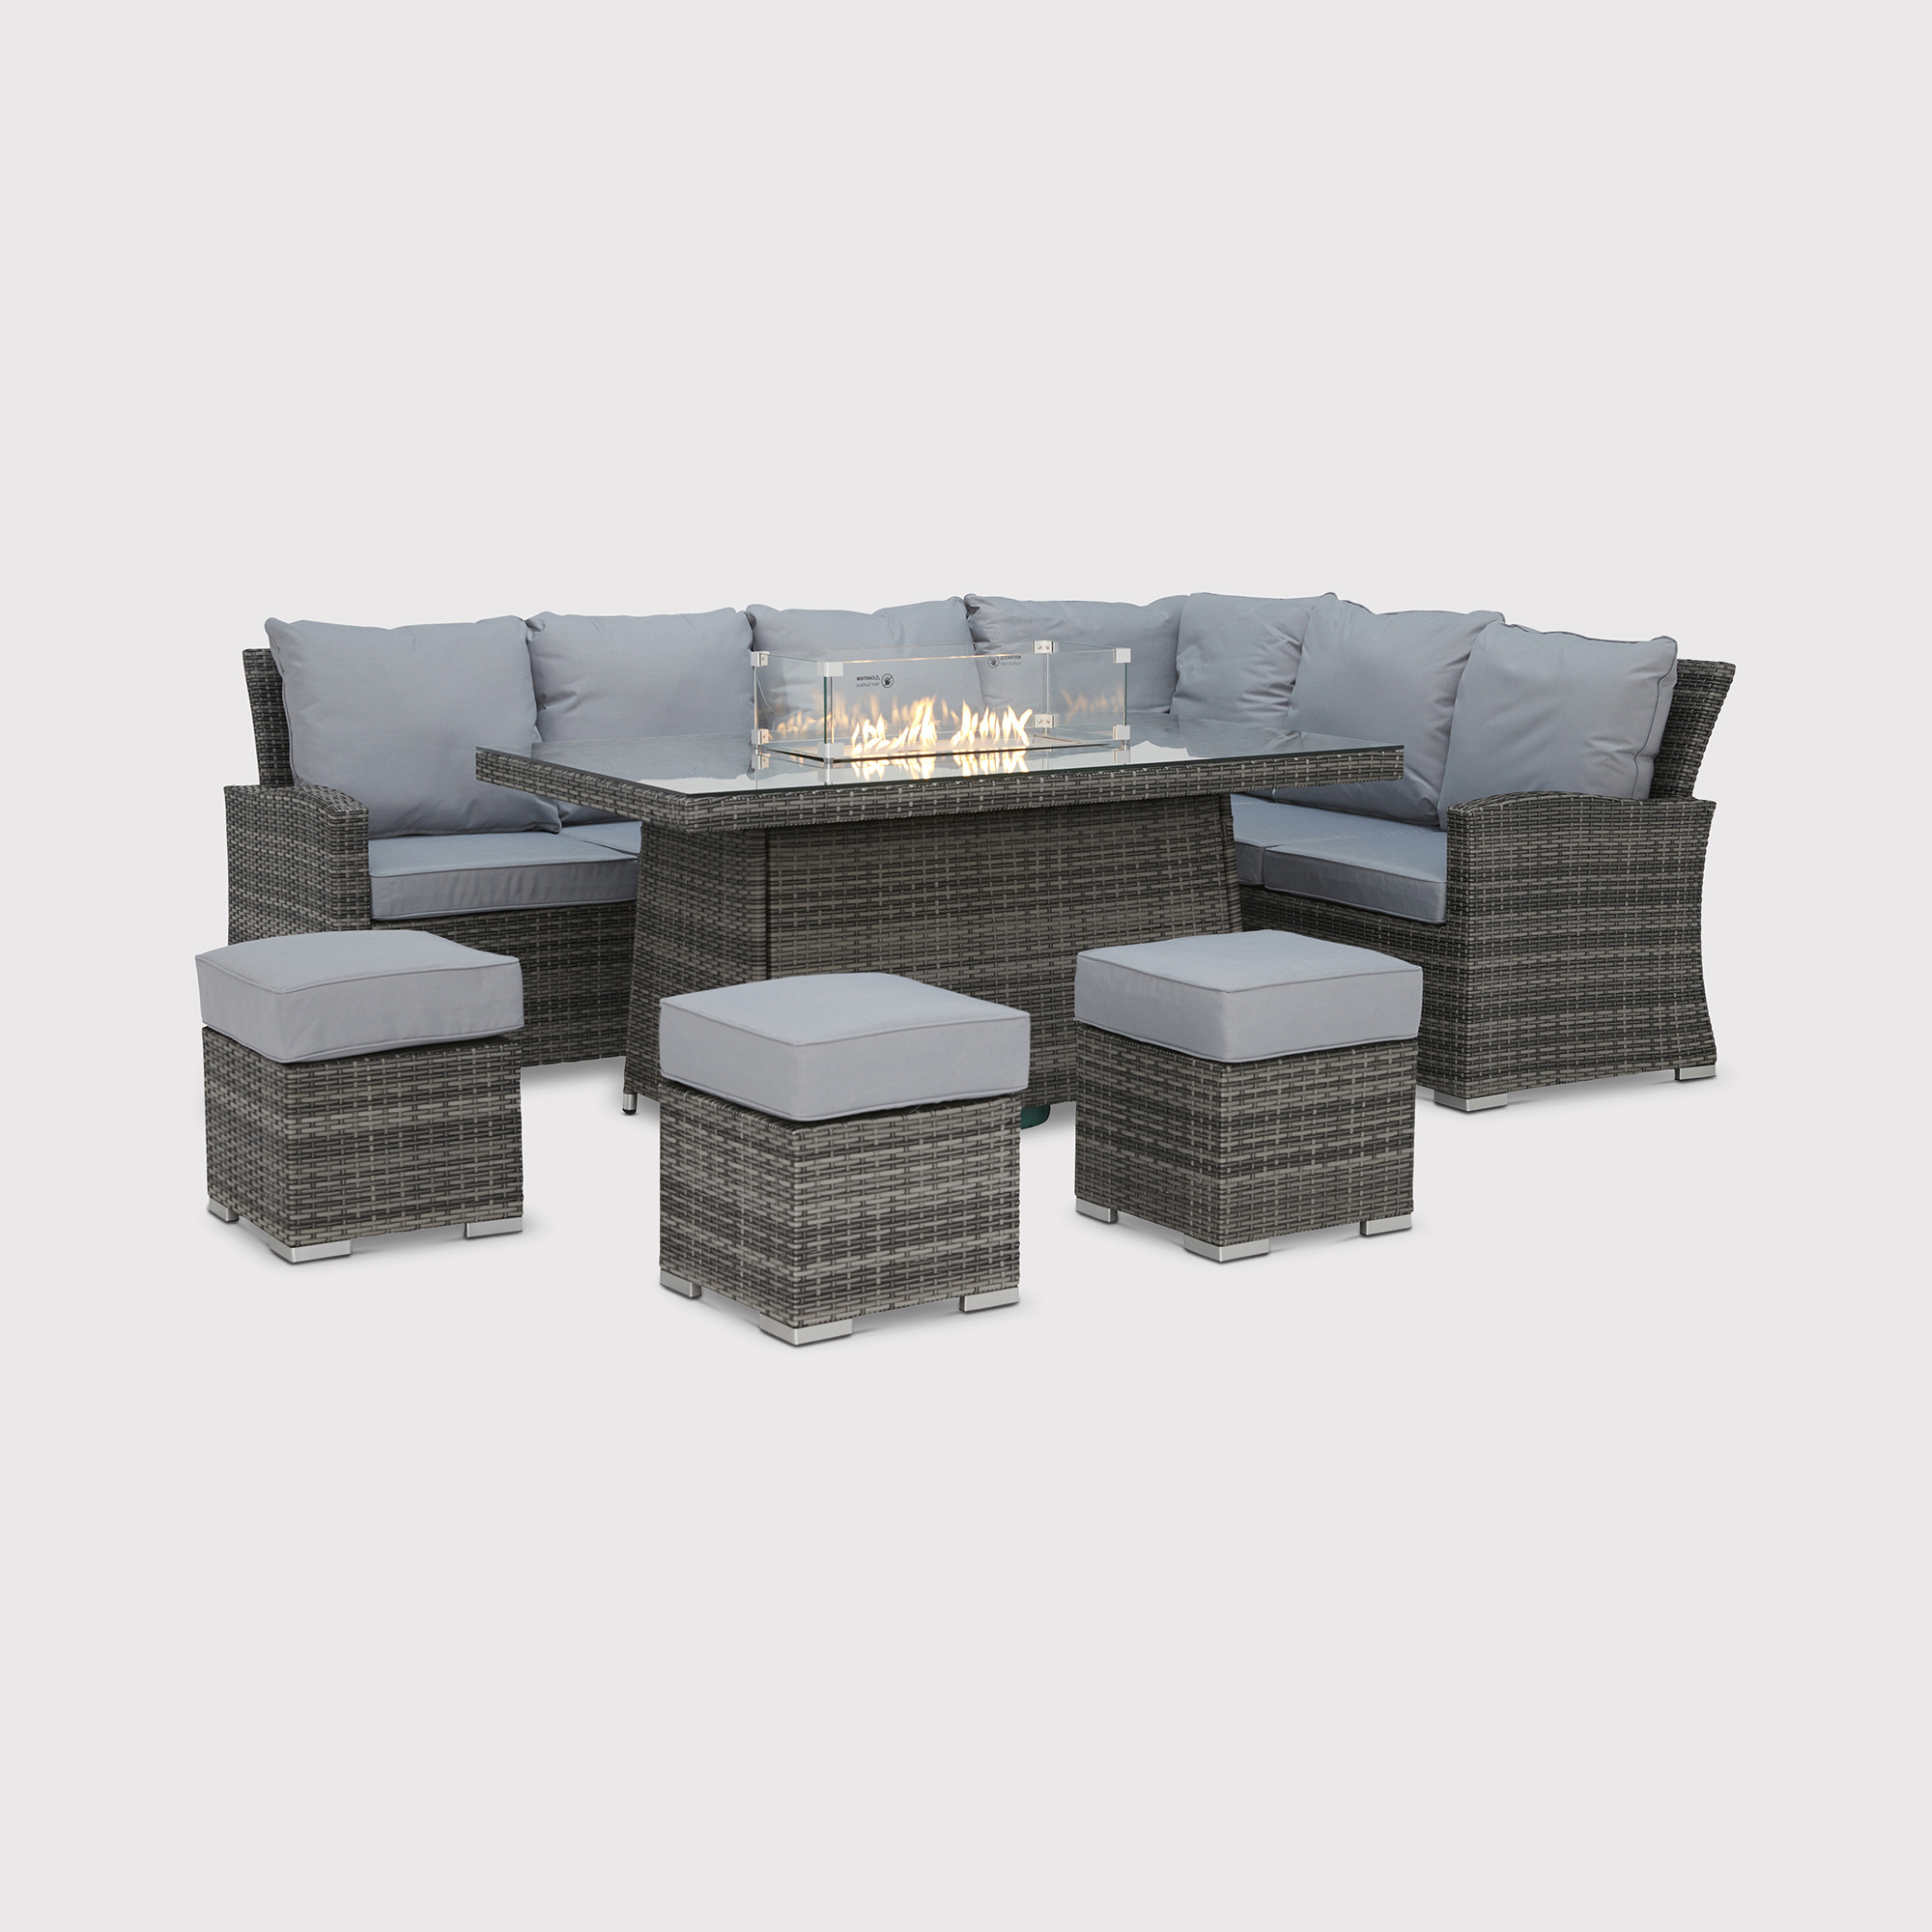 Cresswell Corner Dining Set With Fire Pit, Grey - Barker & Stonehouse - image 1